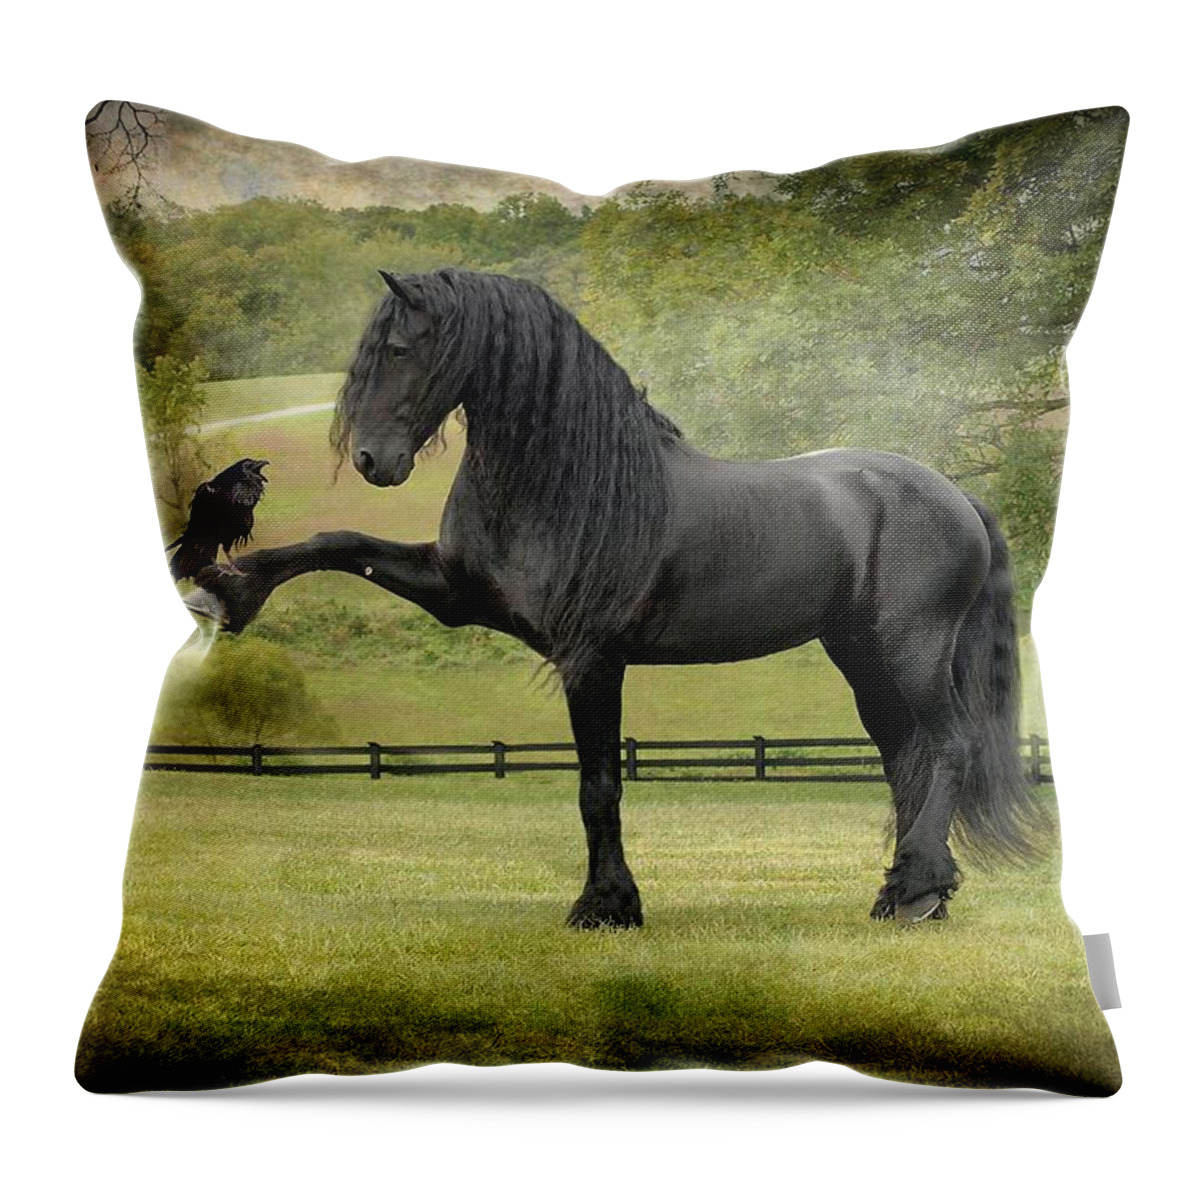 Friesian Horses Throw Pillow featuring the photograph The Harbinger by Fran J Scott